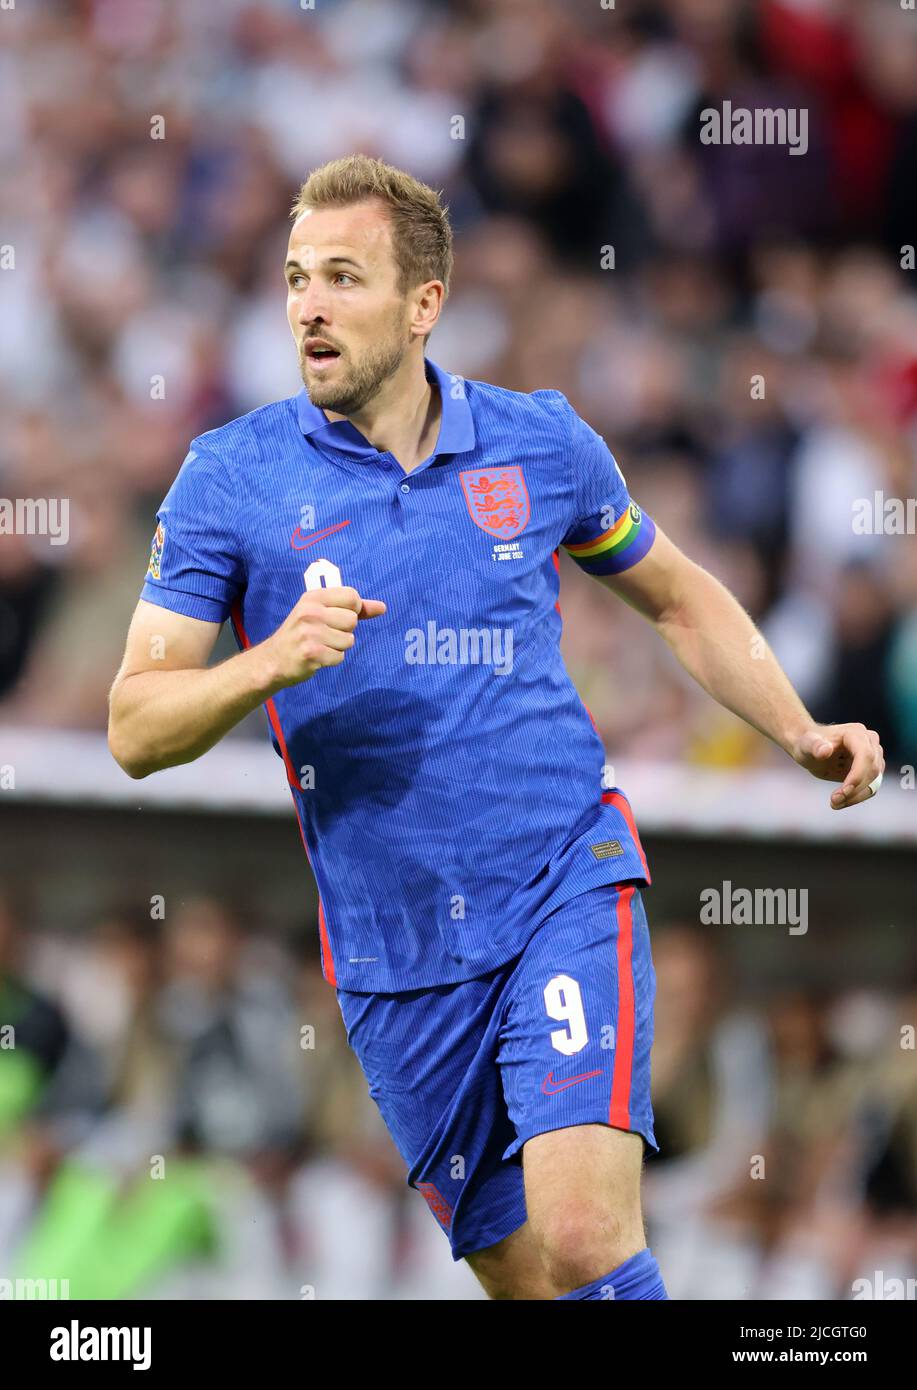 Harry Kane of England  MUNICH, GERMANY - JUNE 07:  UEFA Nations League League A Group 3 match between Germany and England at Allianz Arena on June 07, 2022 in Munich, Germany. Nations League Deutschland England  © diebilderwelt / Alamy Stock Stock Photo